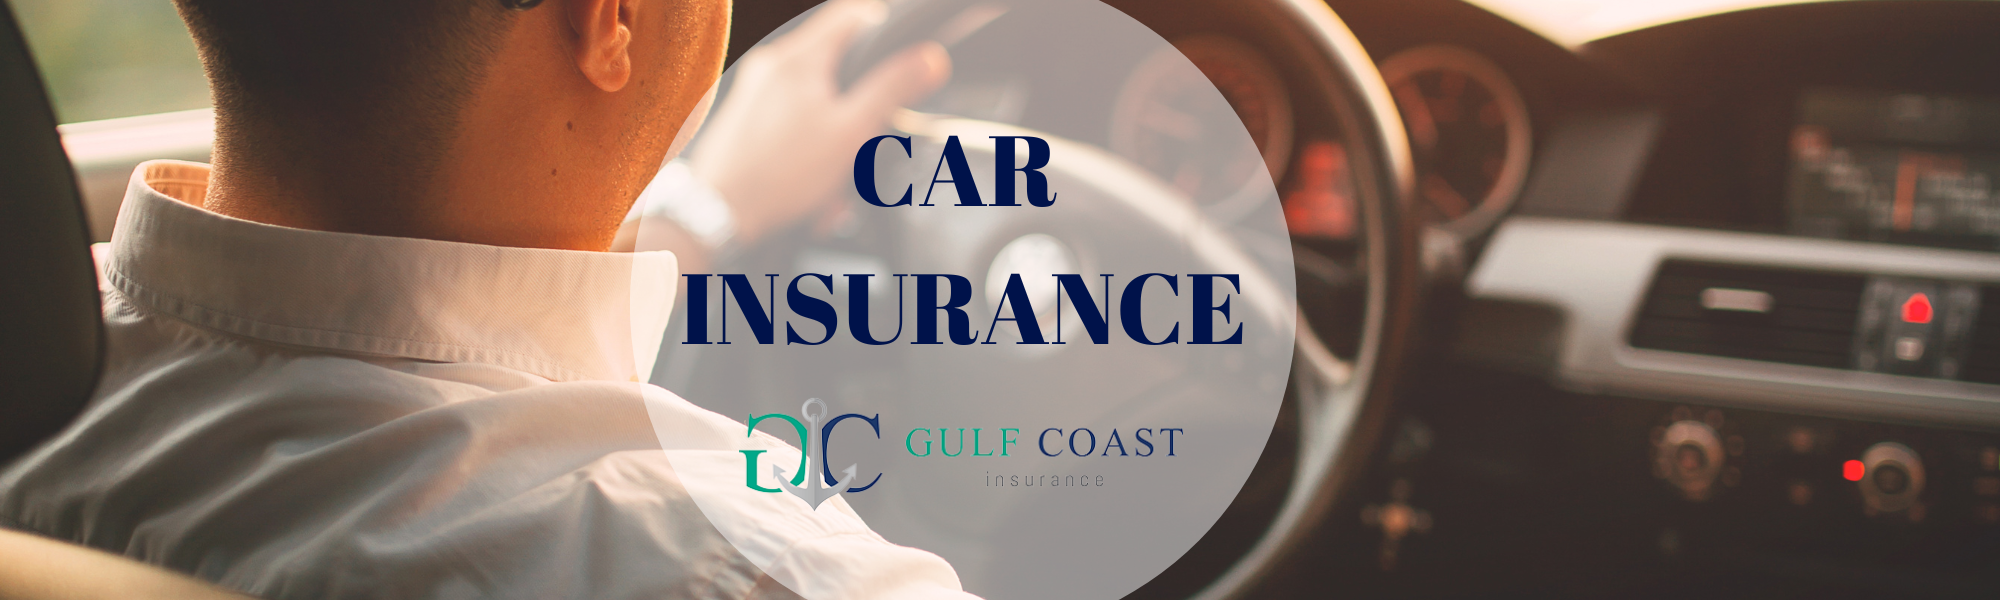 car insurance policy quote in Pensacola